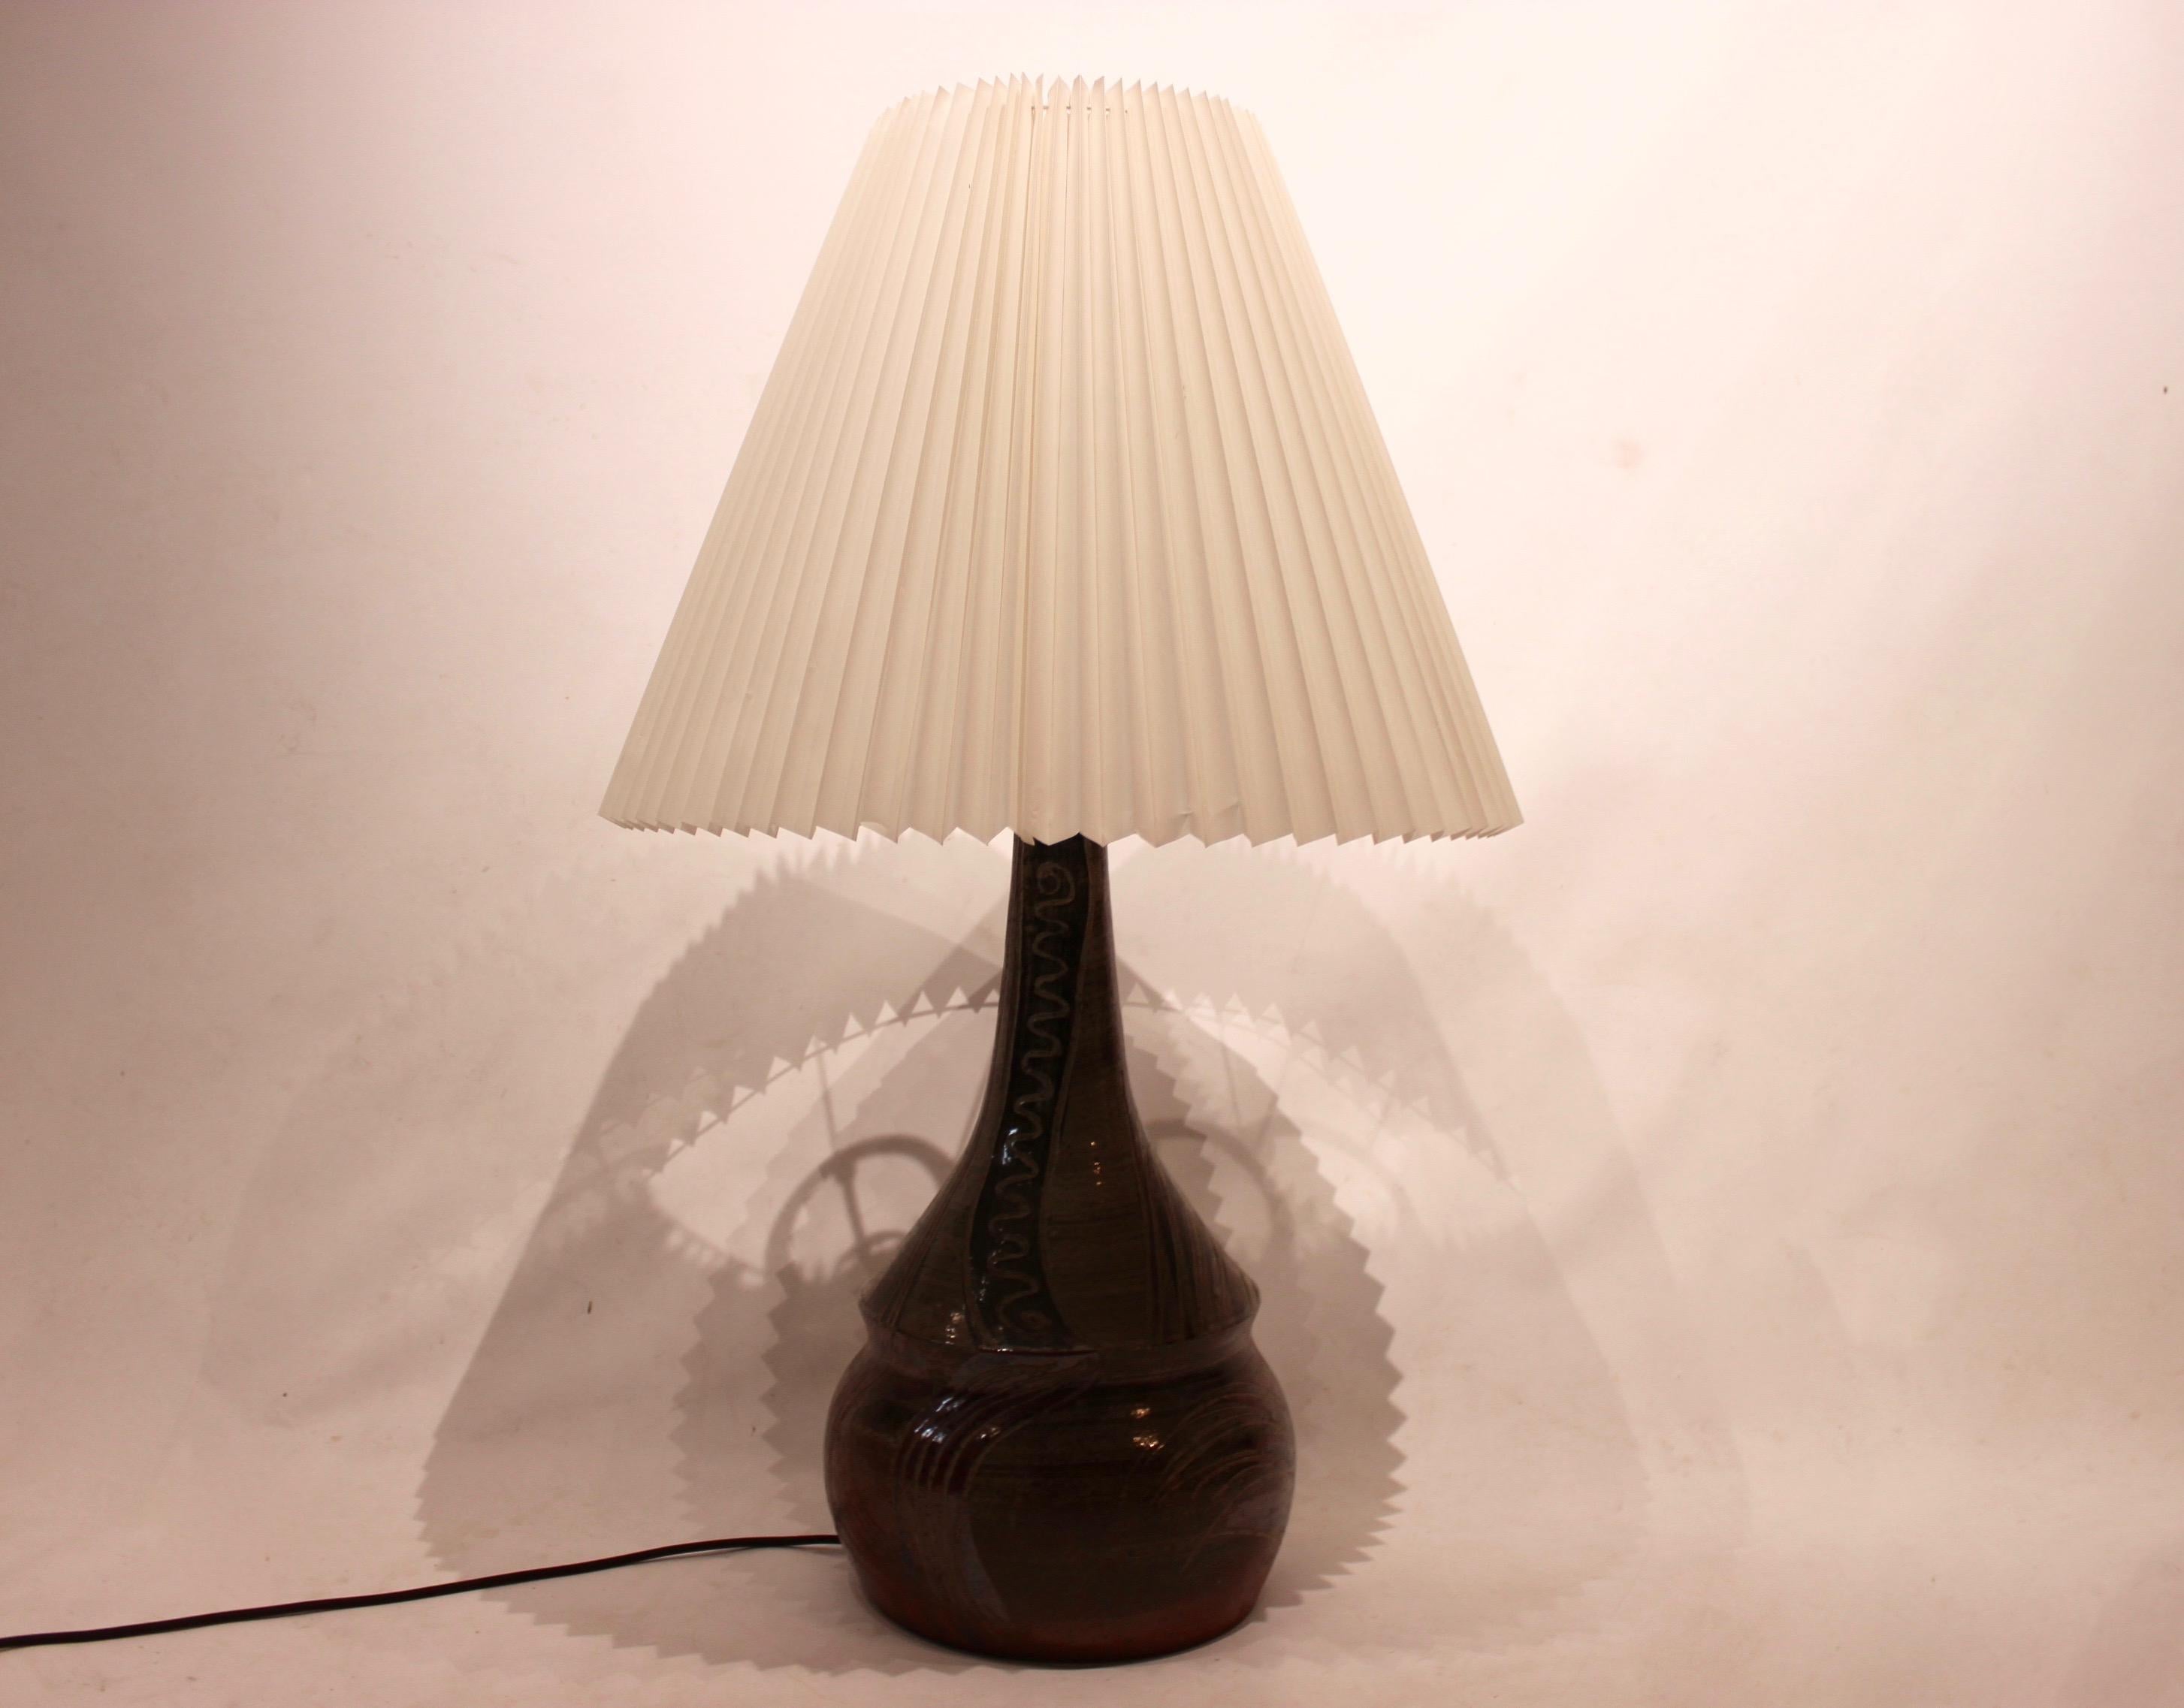 Ceramic table lamp of Danish design by Per Linnemann-Schmidt and from the 1960s. The lamp is in great vintage condition.